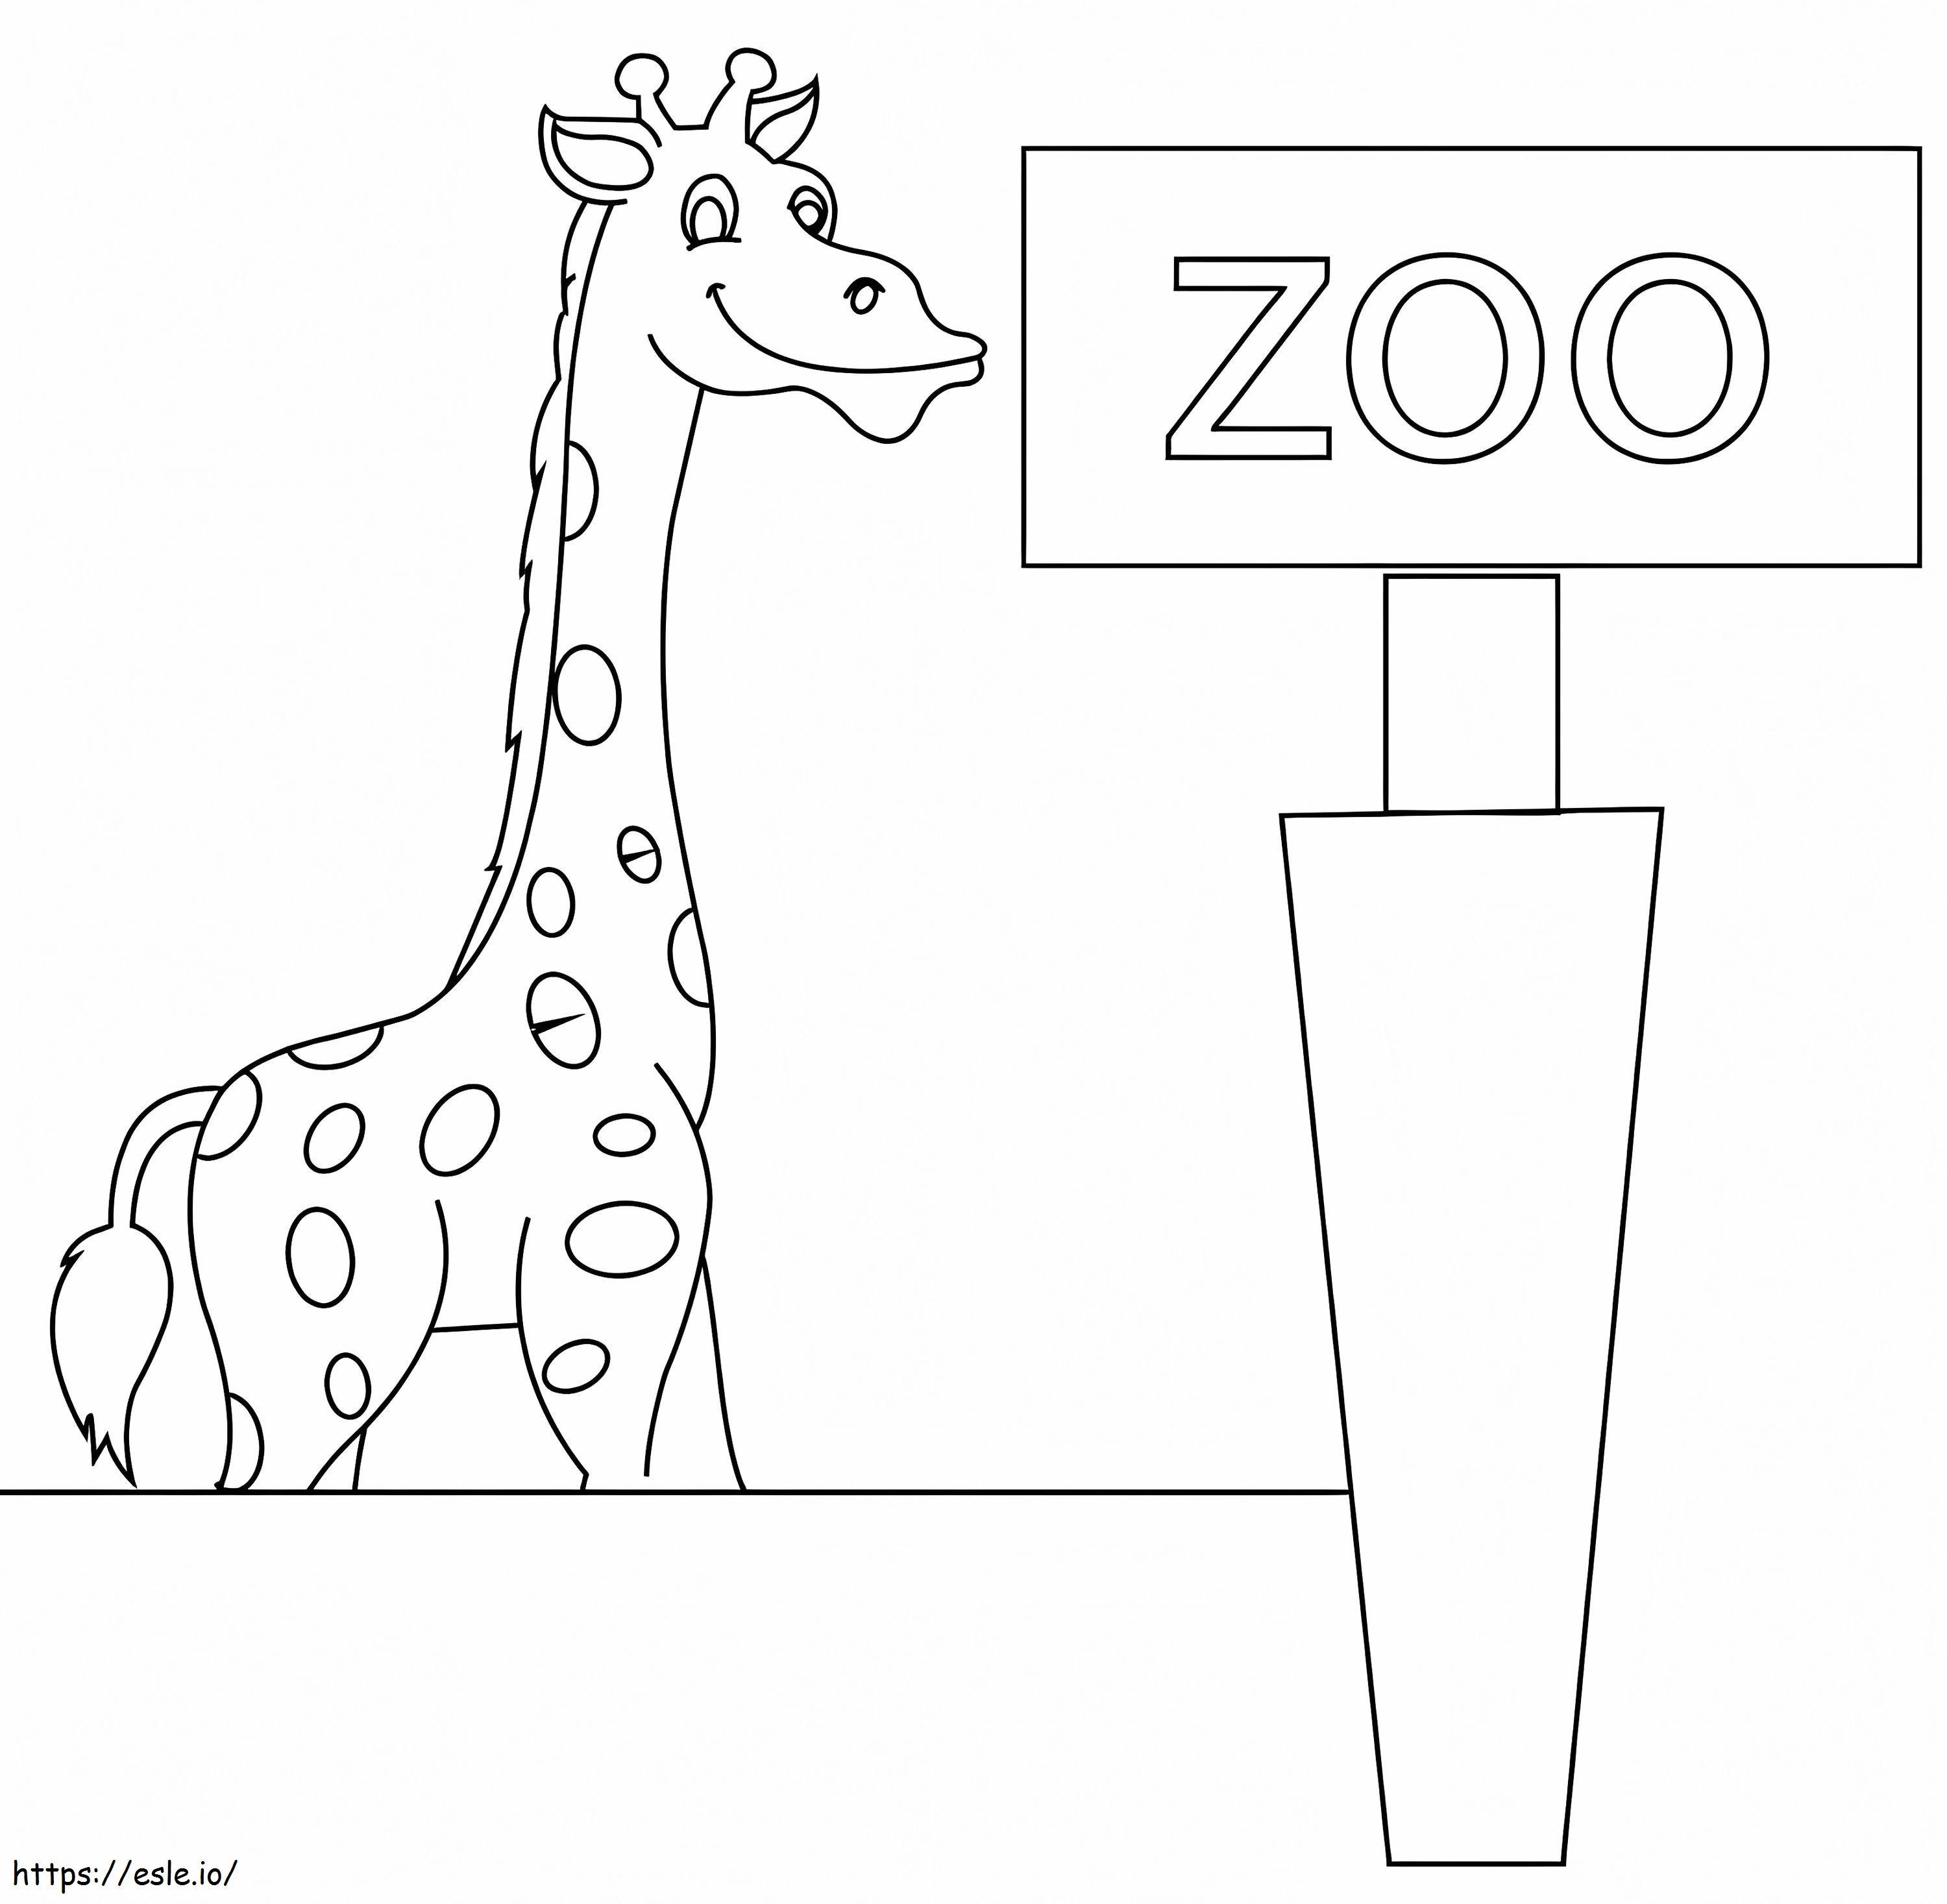 Giraffe In A Zoo coloring page